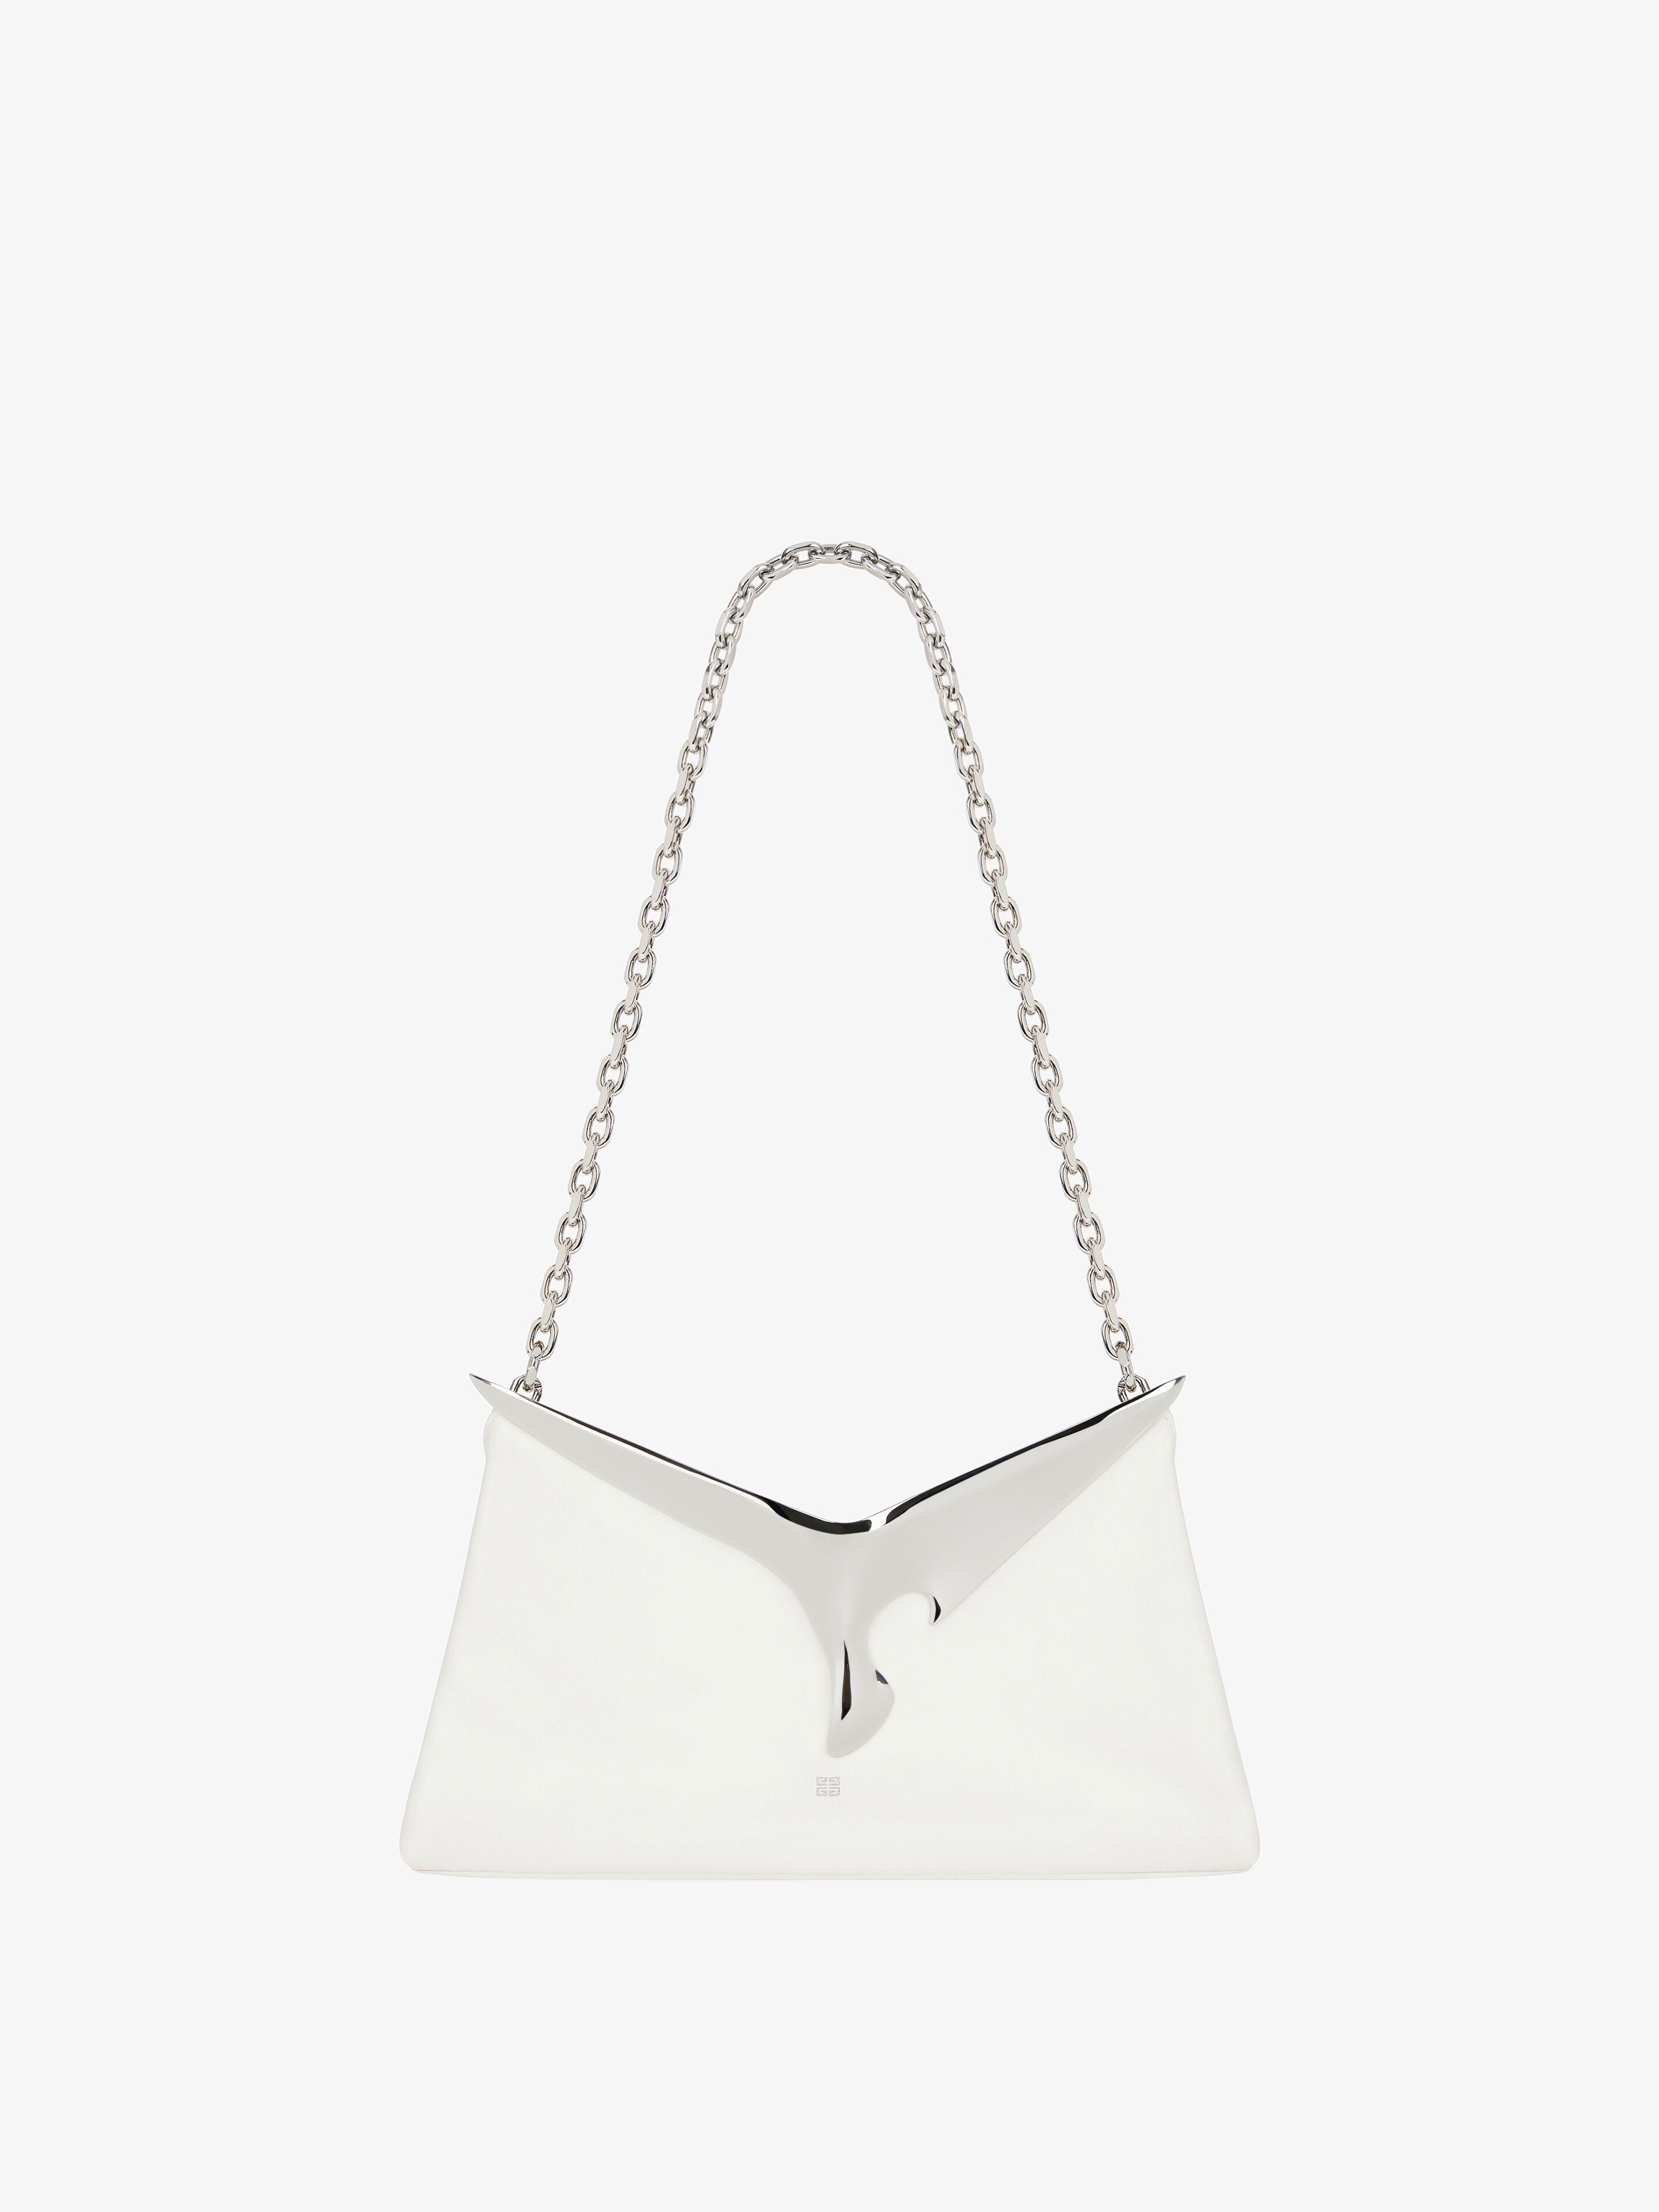 CUT OUT BIRD BAG IN NAPPA LEATHER - 4